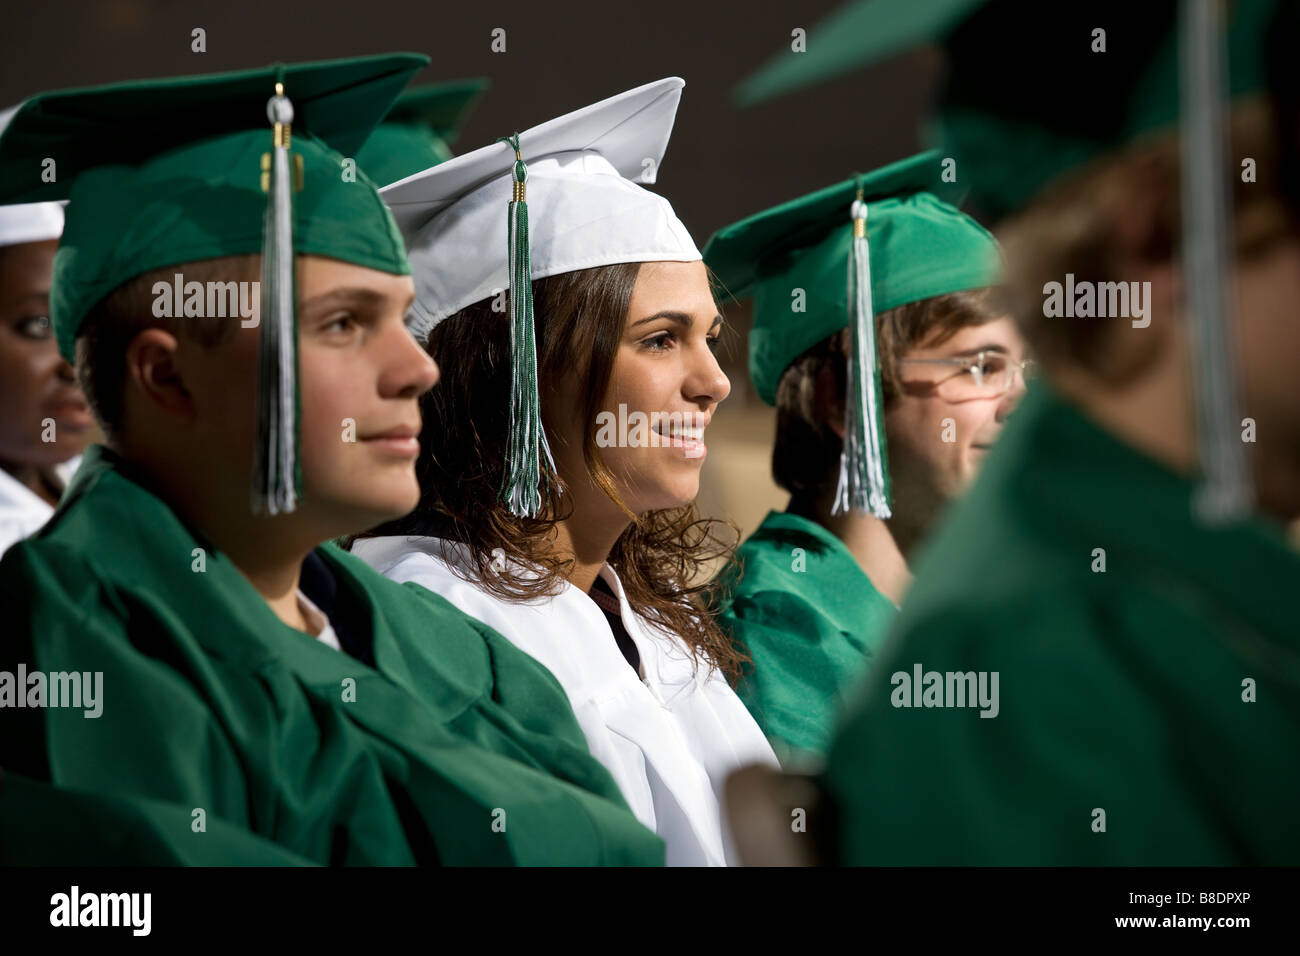 High school students in graduation gowns at commencement ceremony. Stock Photo